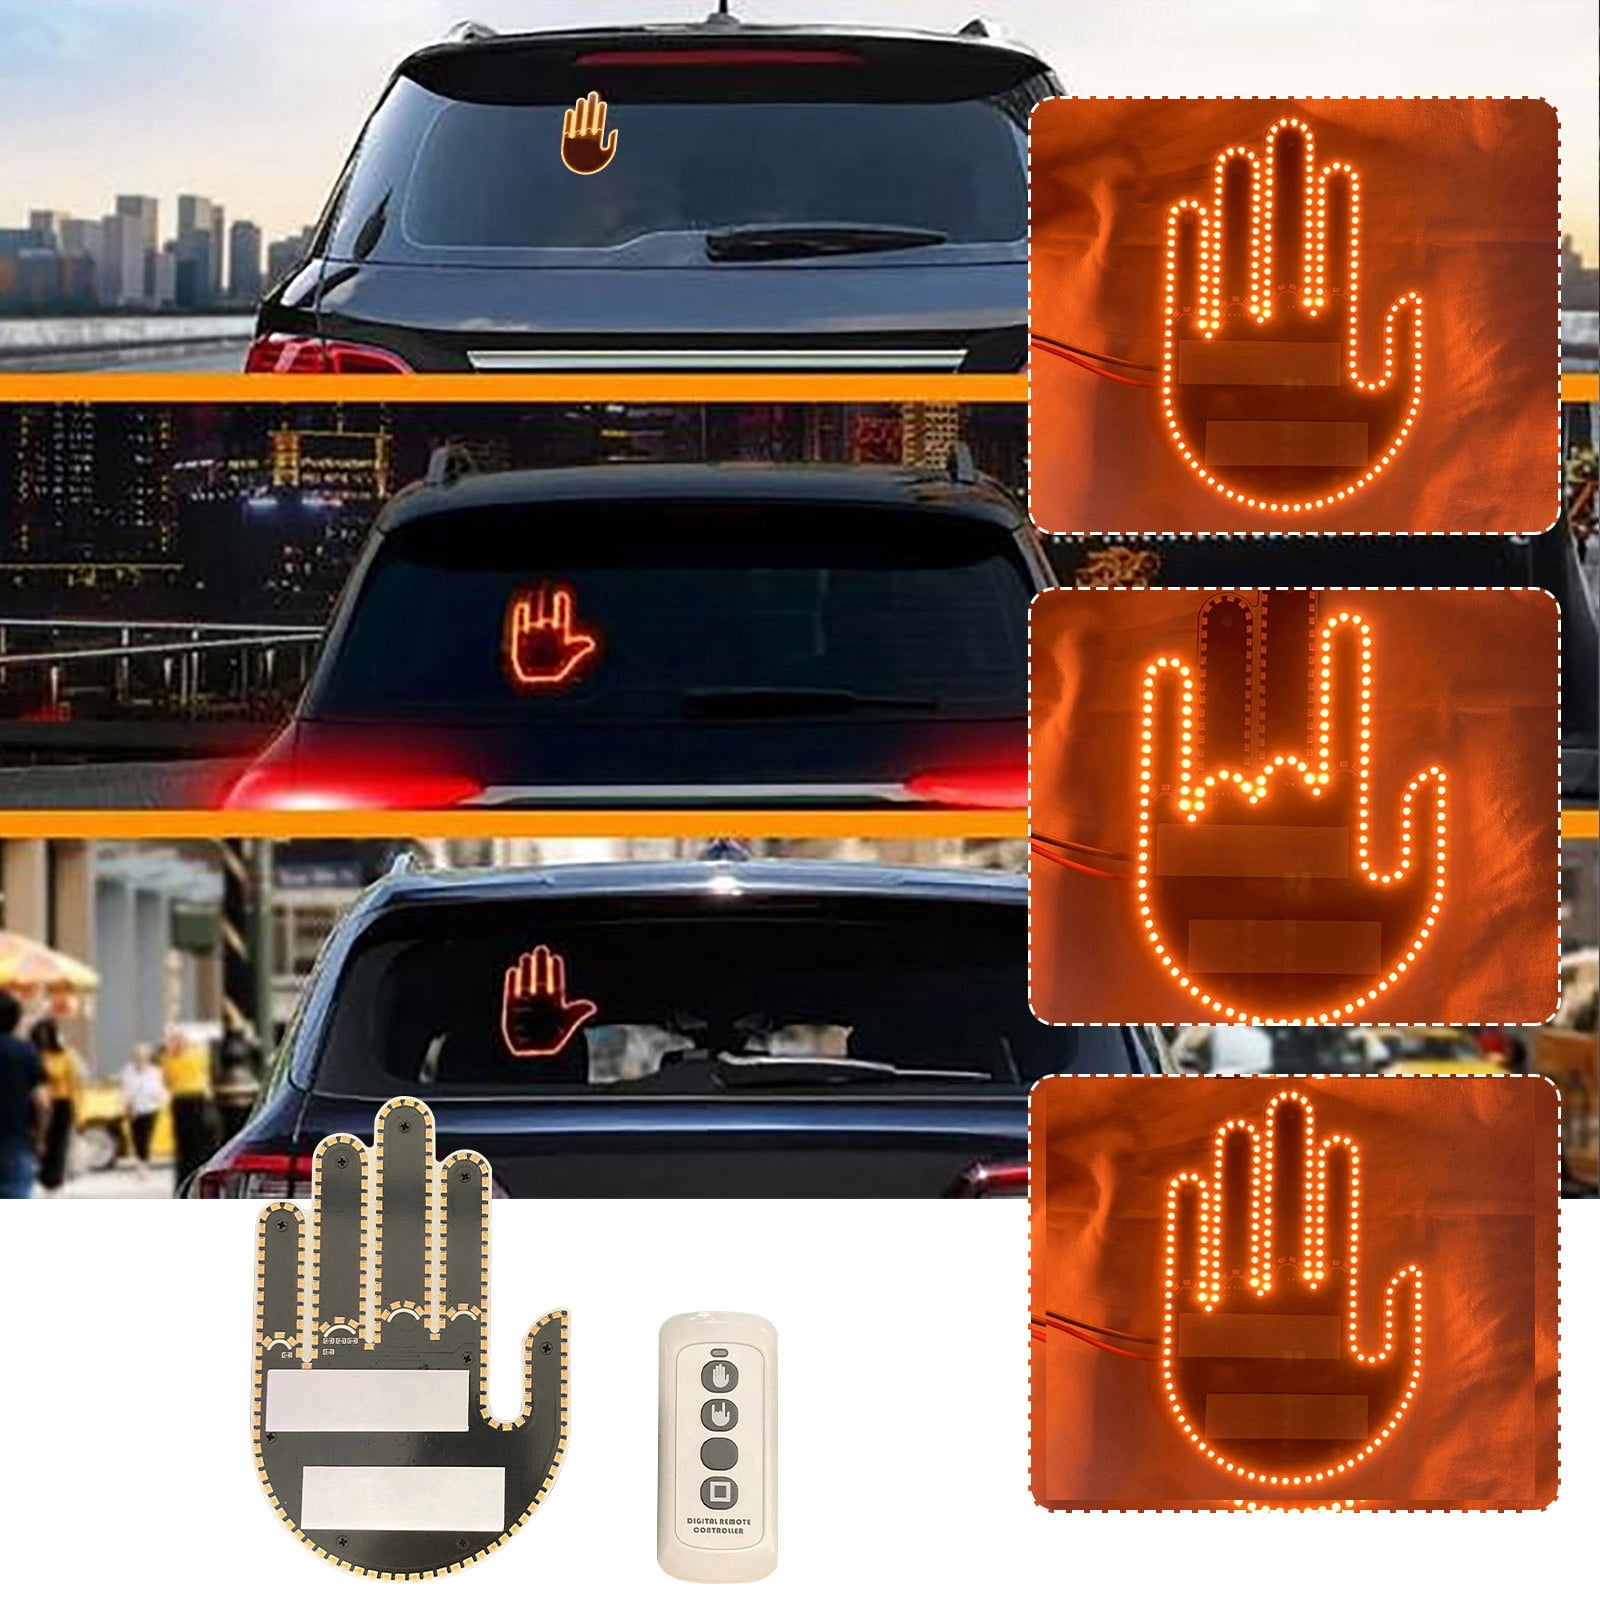 Free shipping on all orders. #middlefingercarlight, car lights